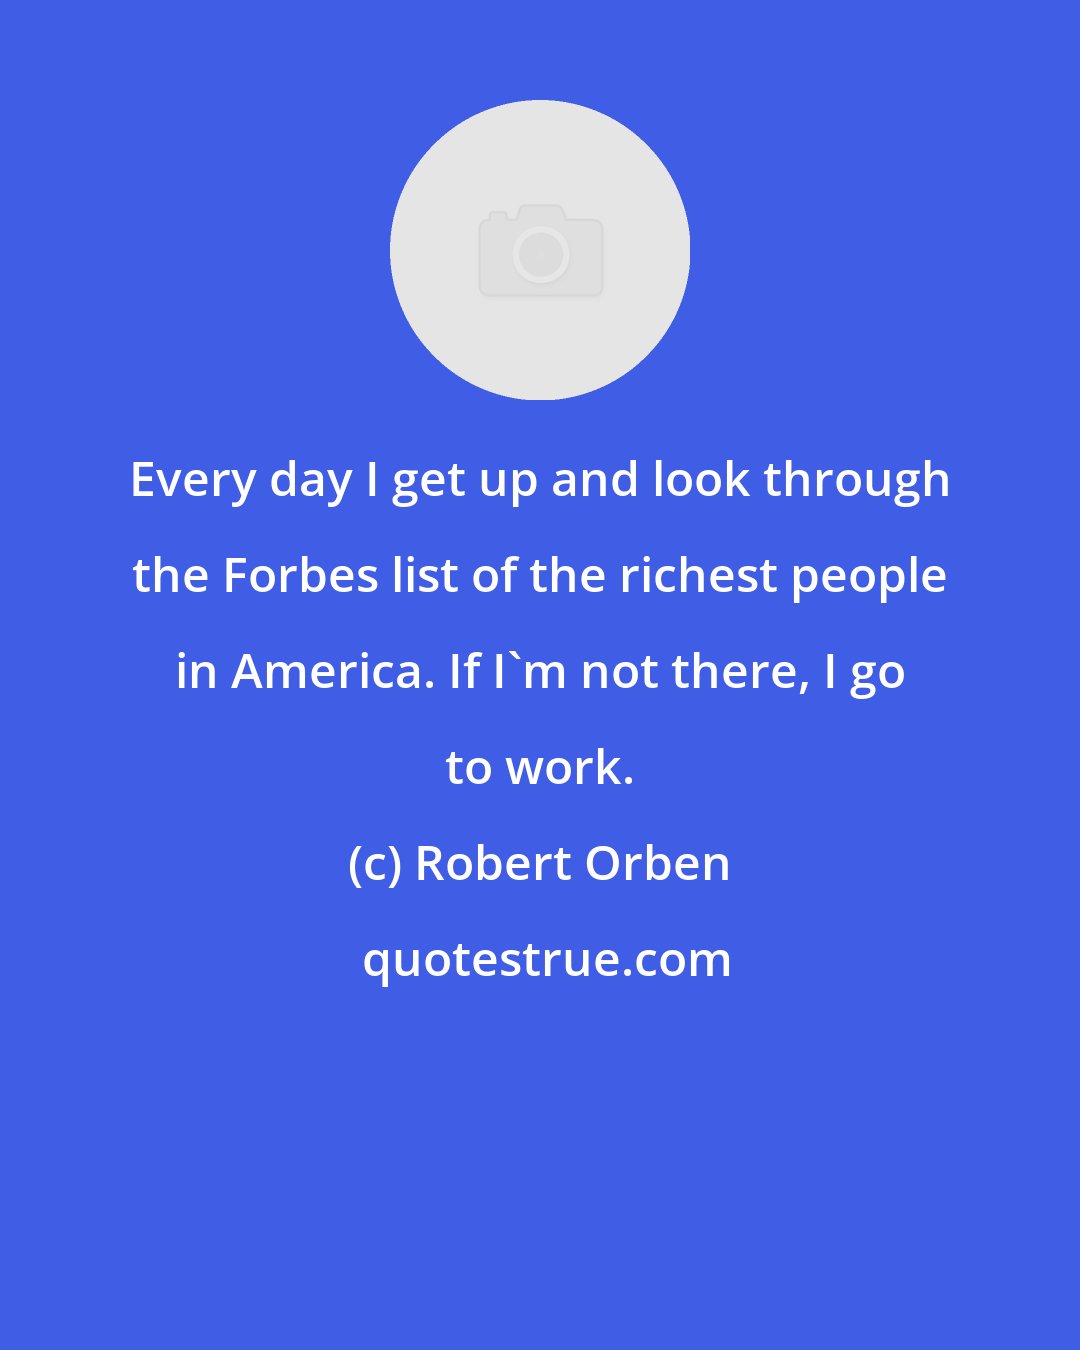 Robert Orben: Every day I get up and look through the Forbes list of the richest people in America. If I'm not there, I go to work.